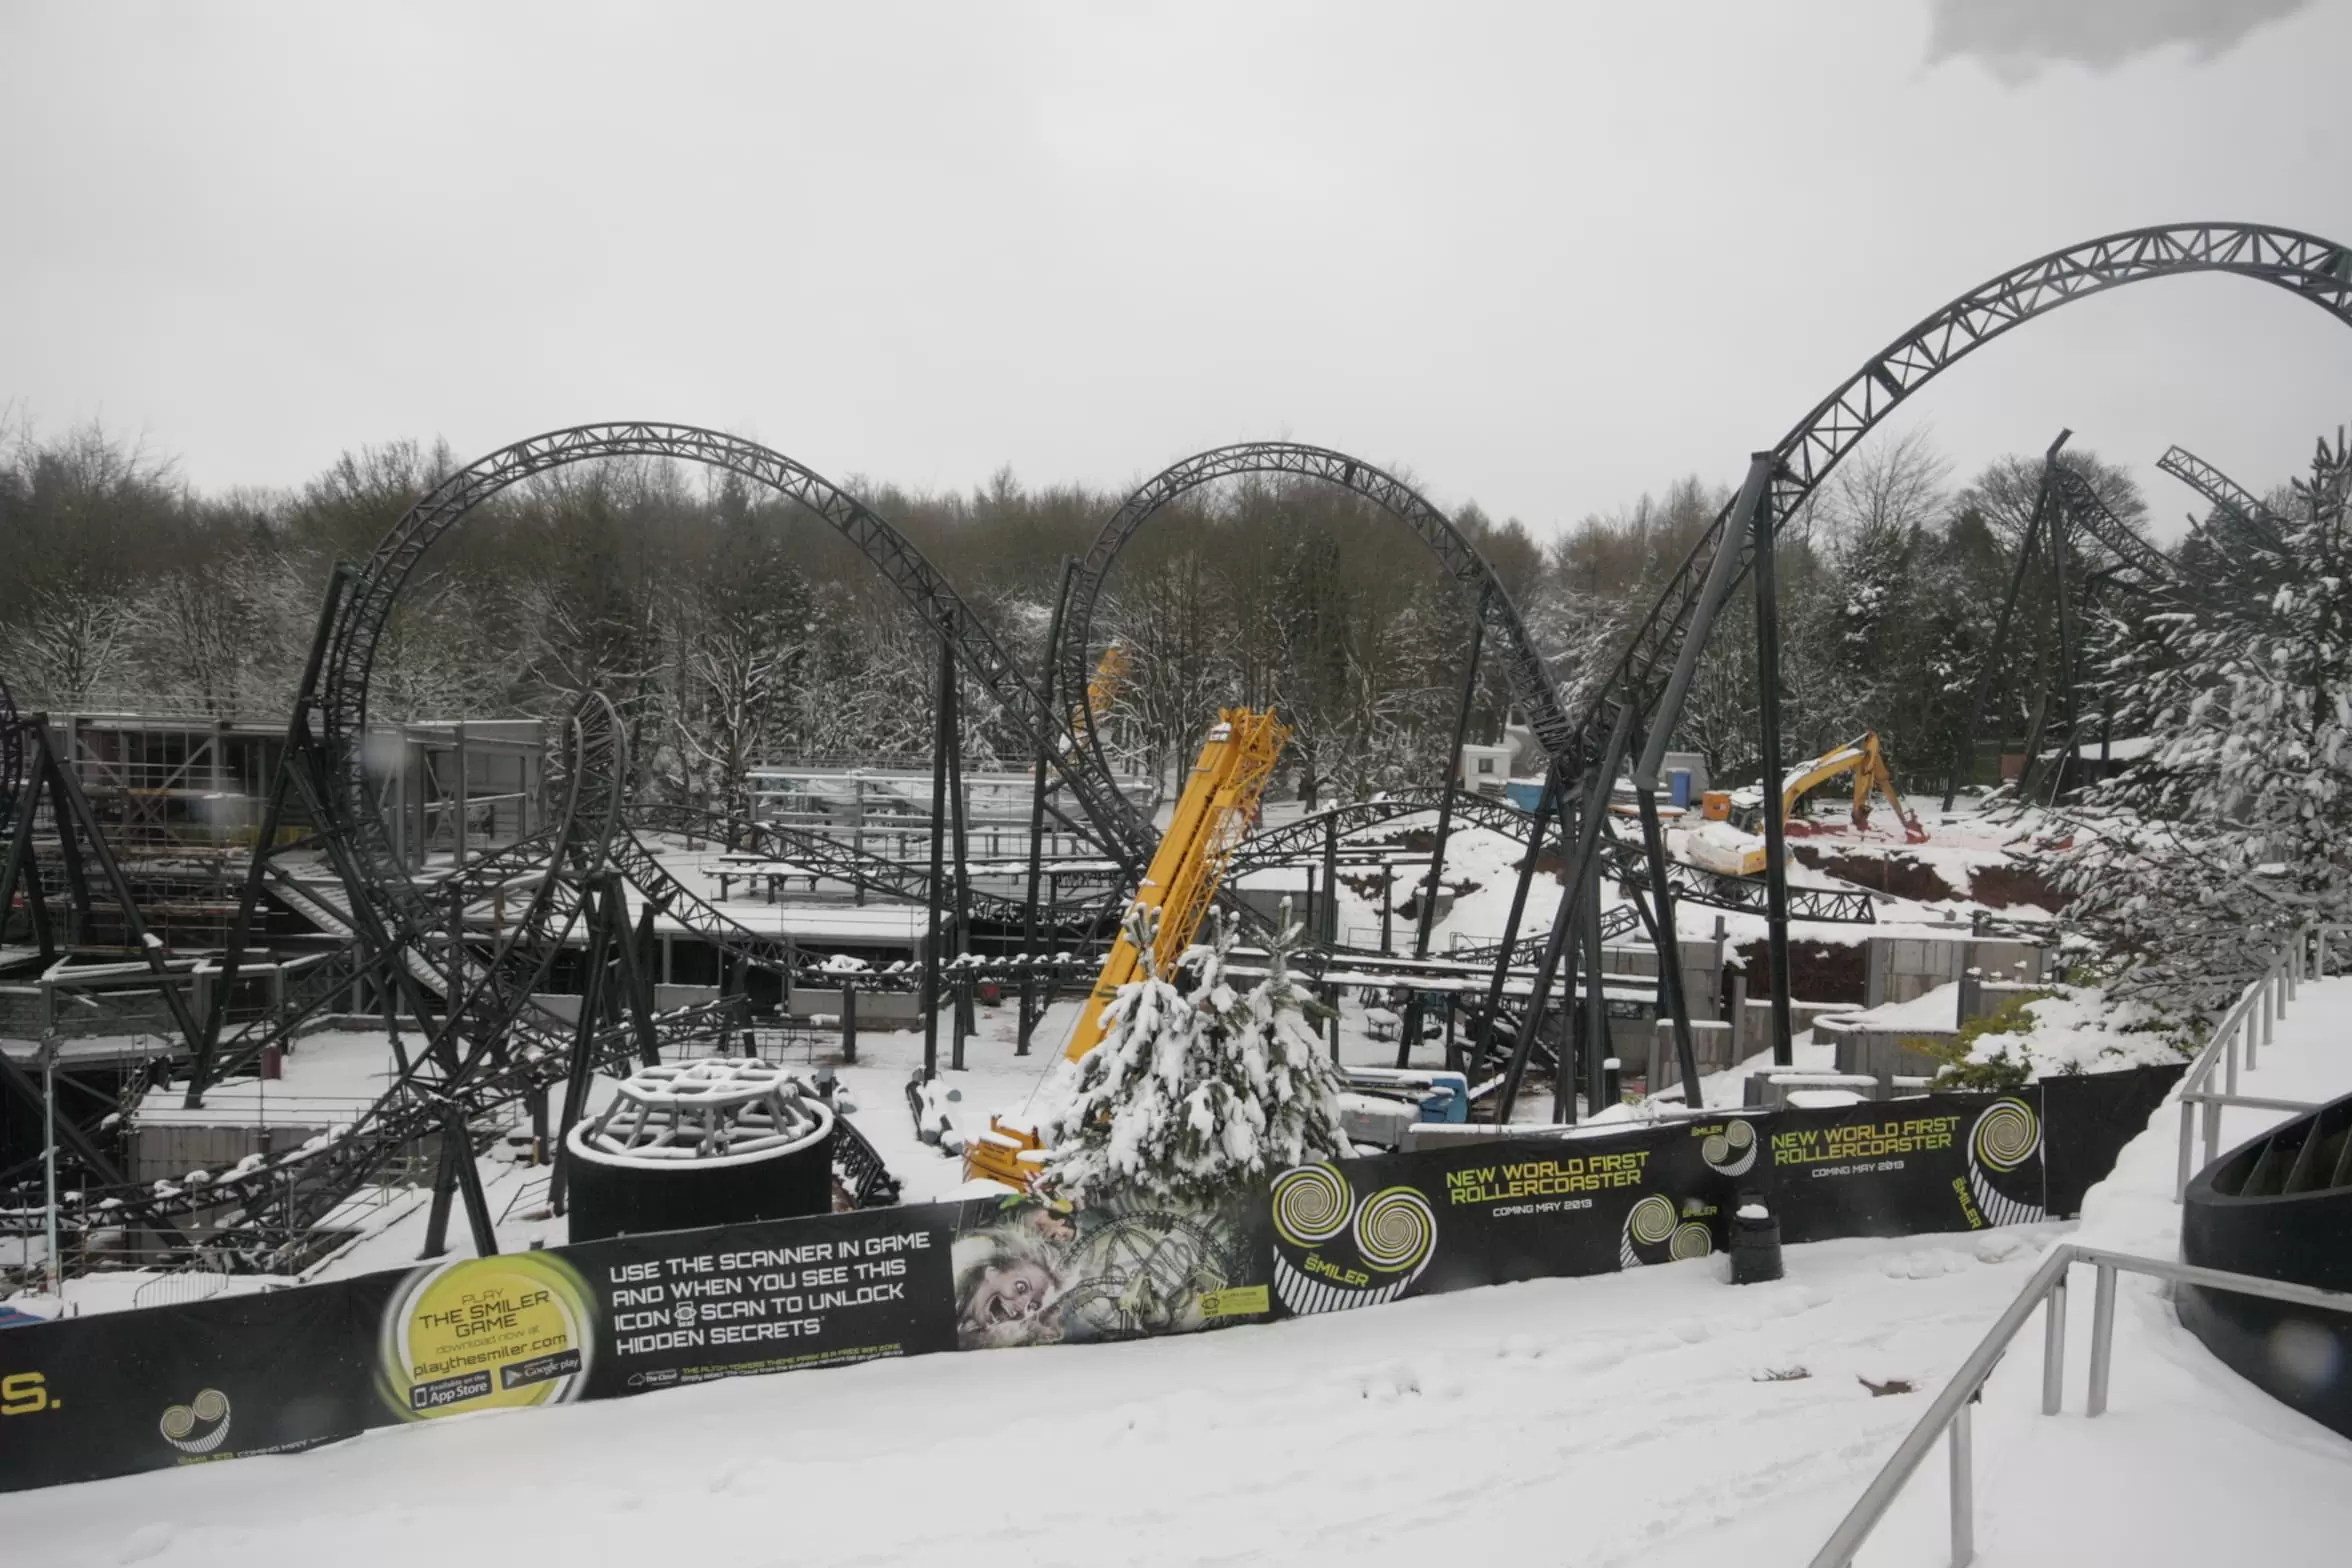 Snow at The Smiler construction site at Alton Towers